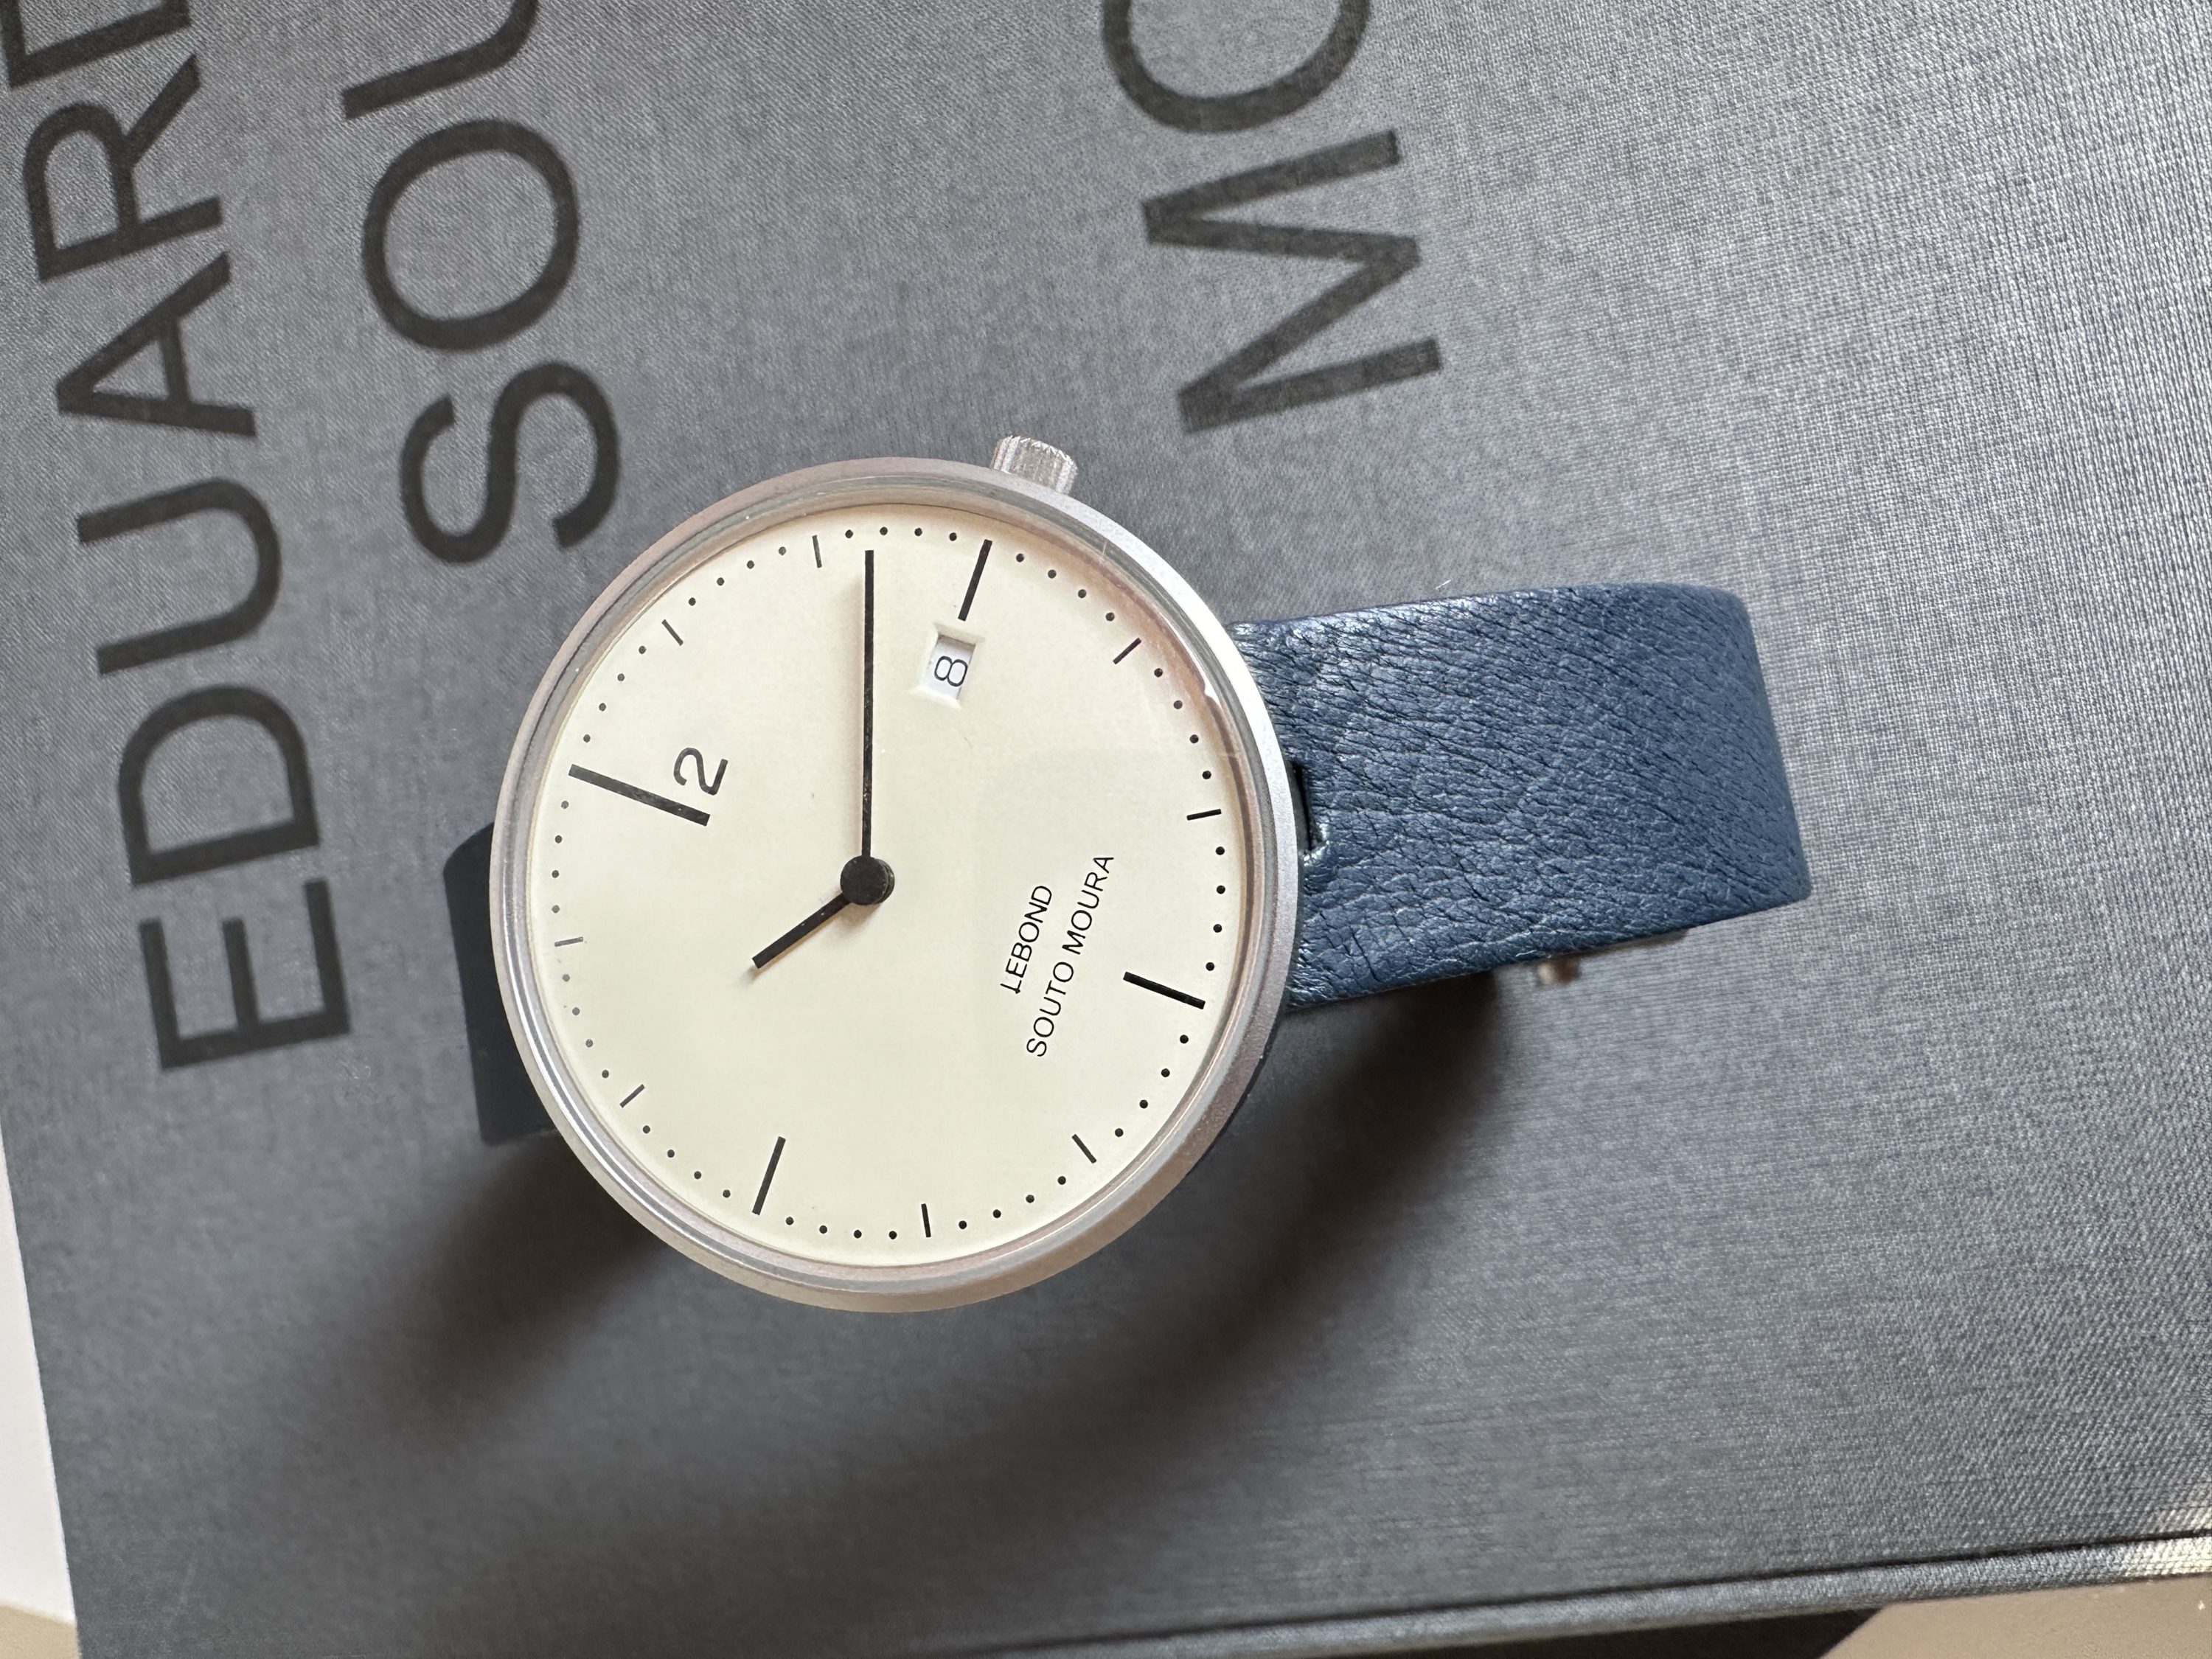 What Happens When an Award-winning Architect Designs a Watch" The Lebond Souto Moura.